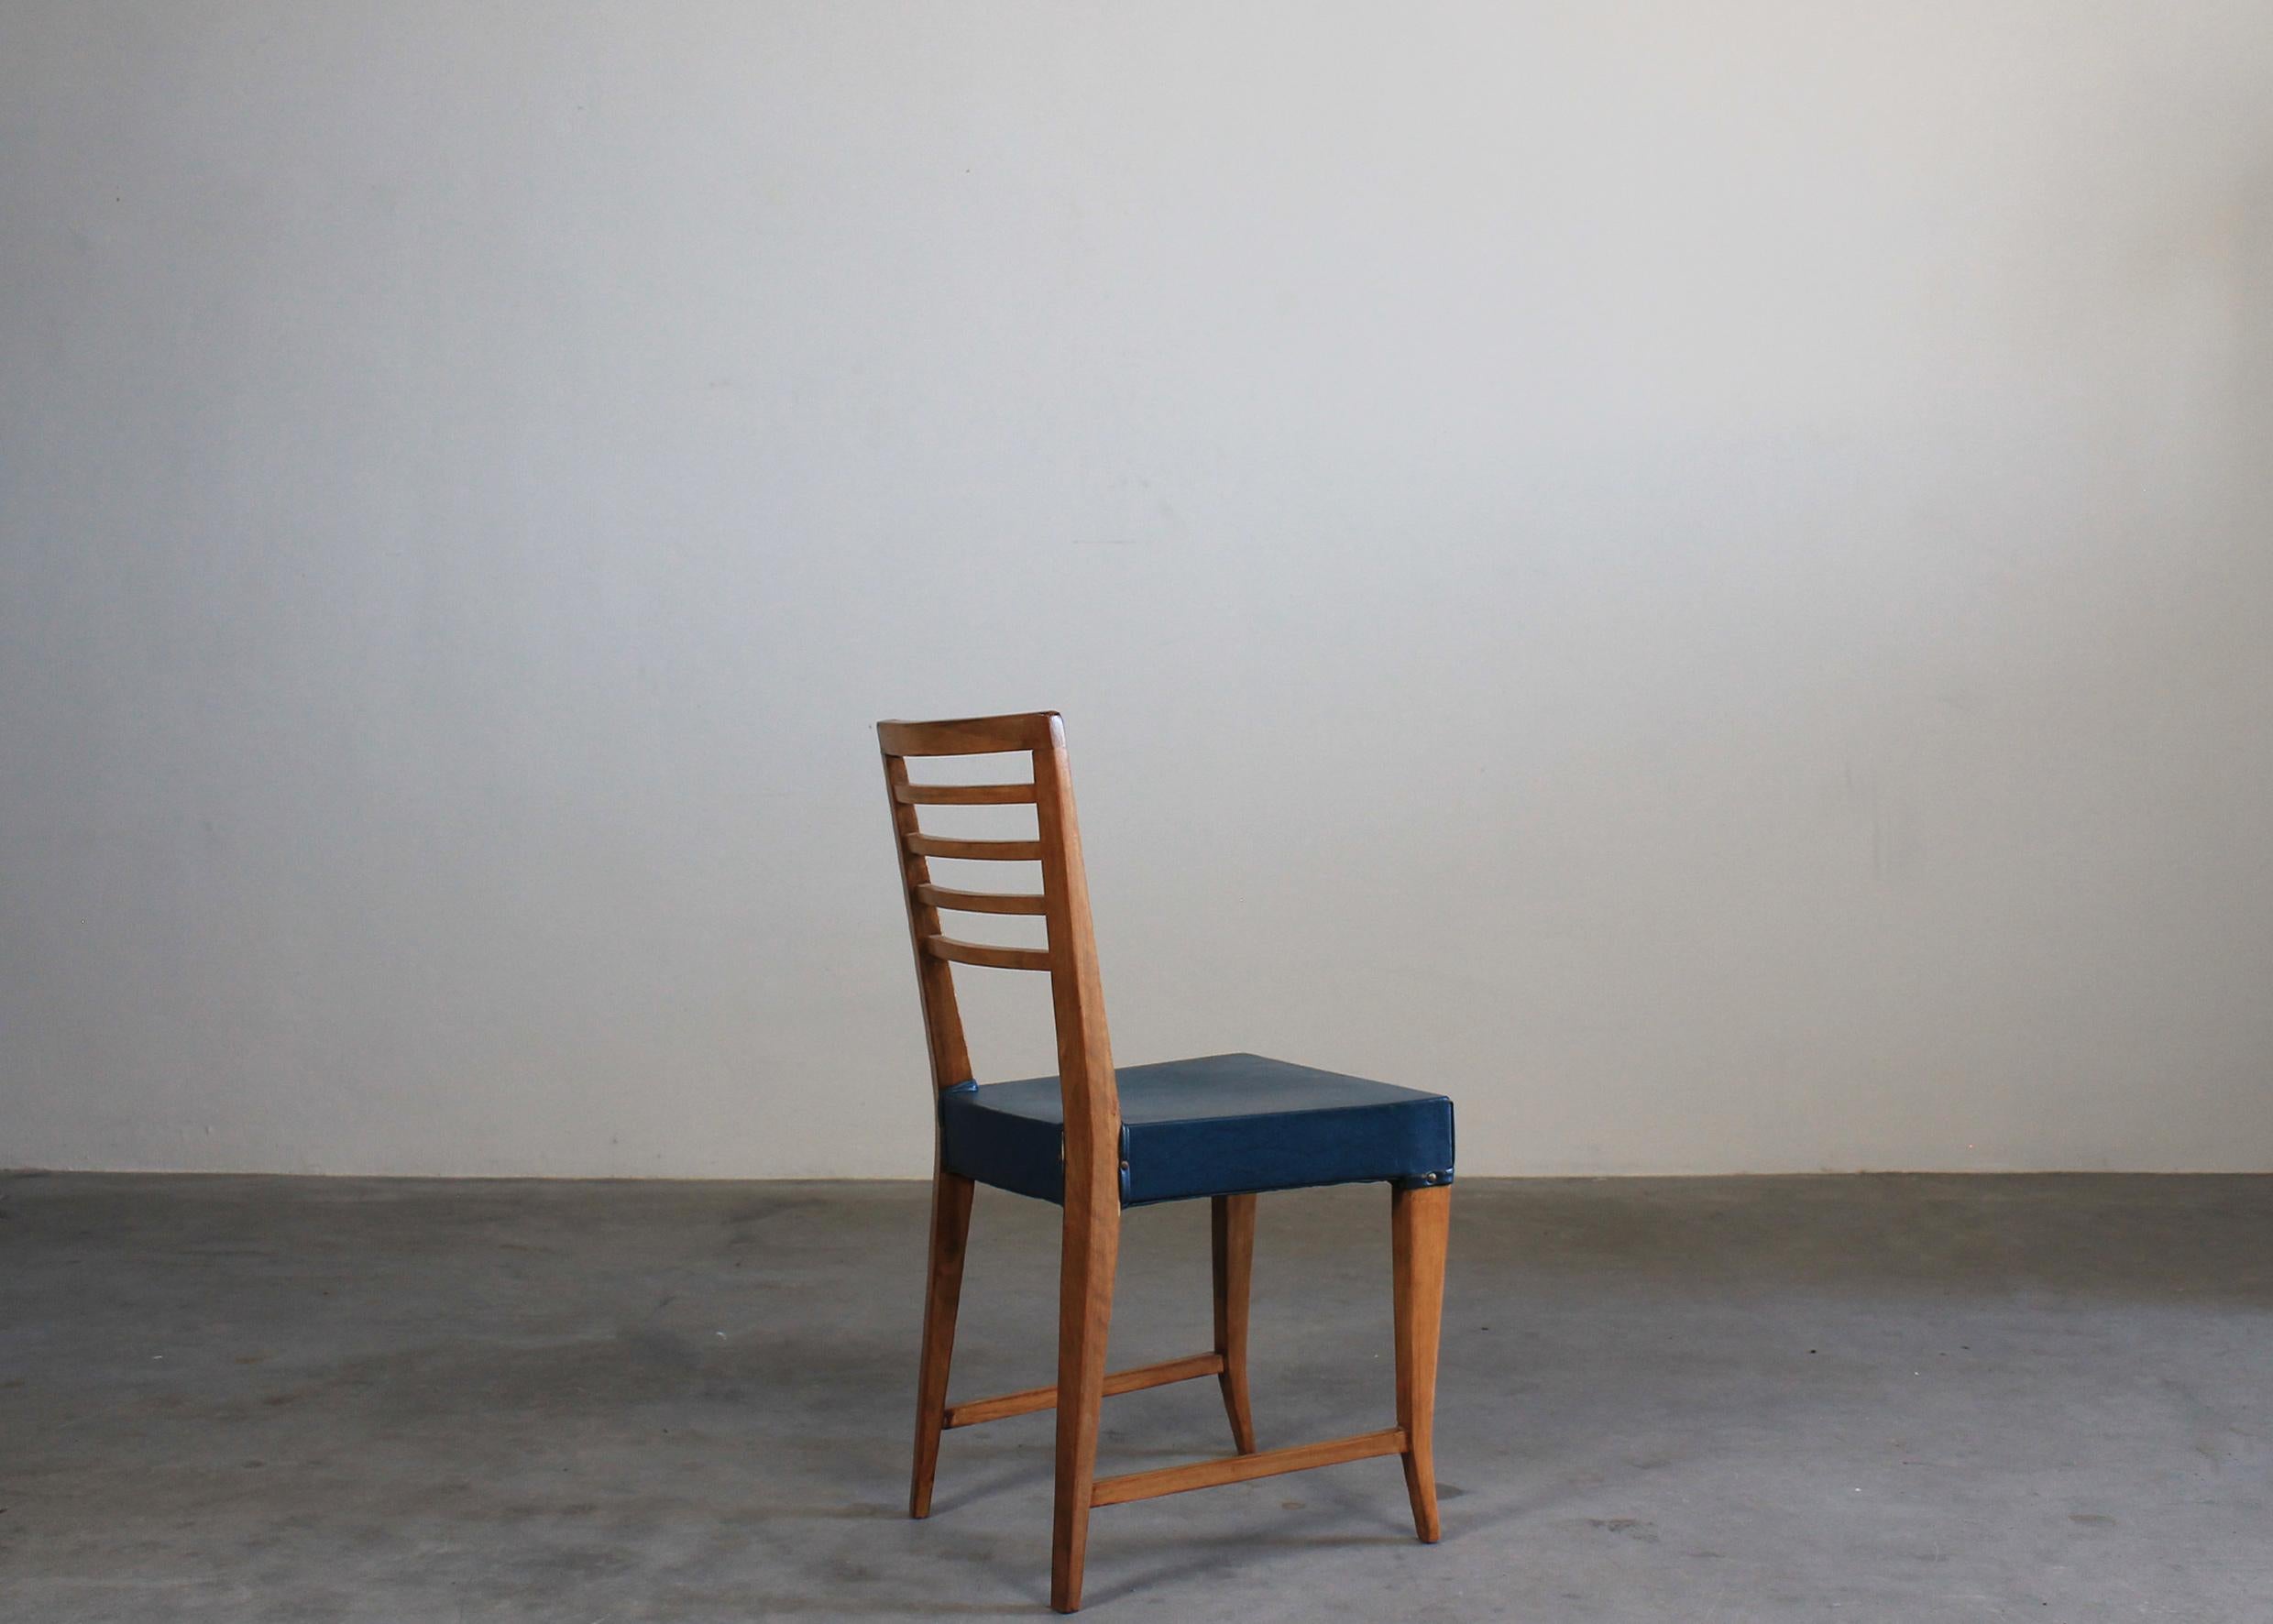 Mid-20th Century Gio Ponti Office Chair in Beech Wood for BNL Italian Manufacture 1940s